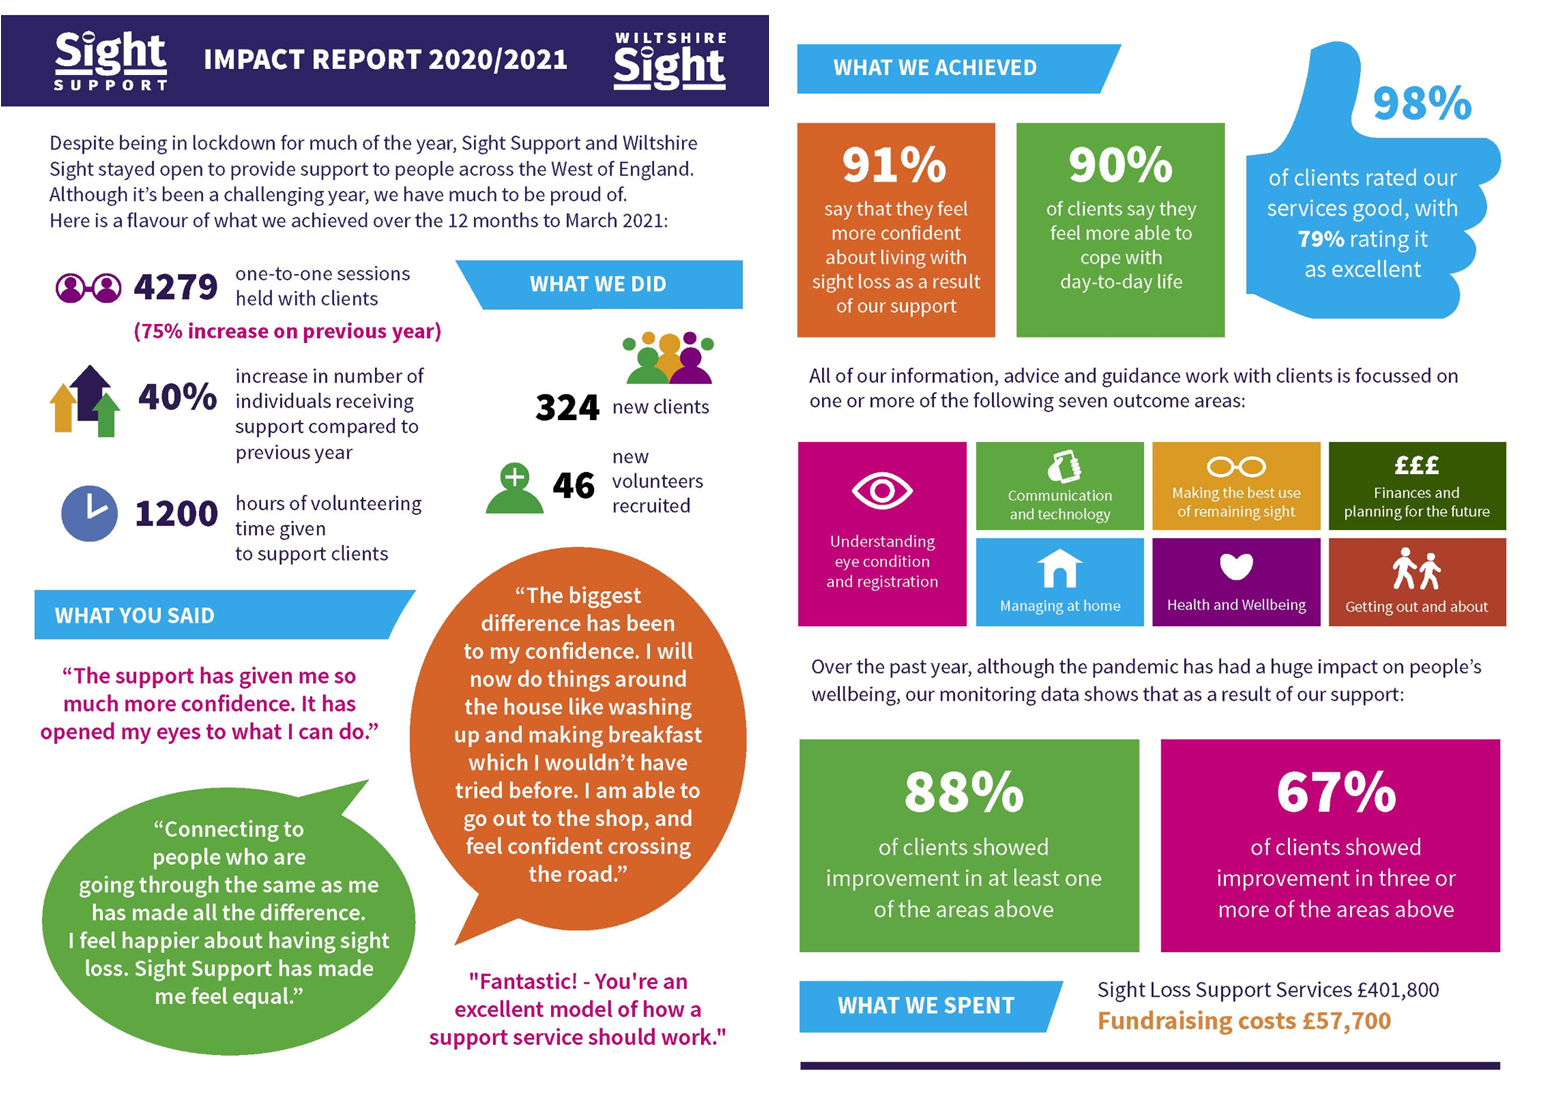 Sight Support and WIltshire SIght Impact Report 20/21